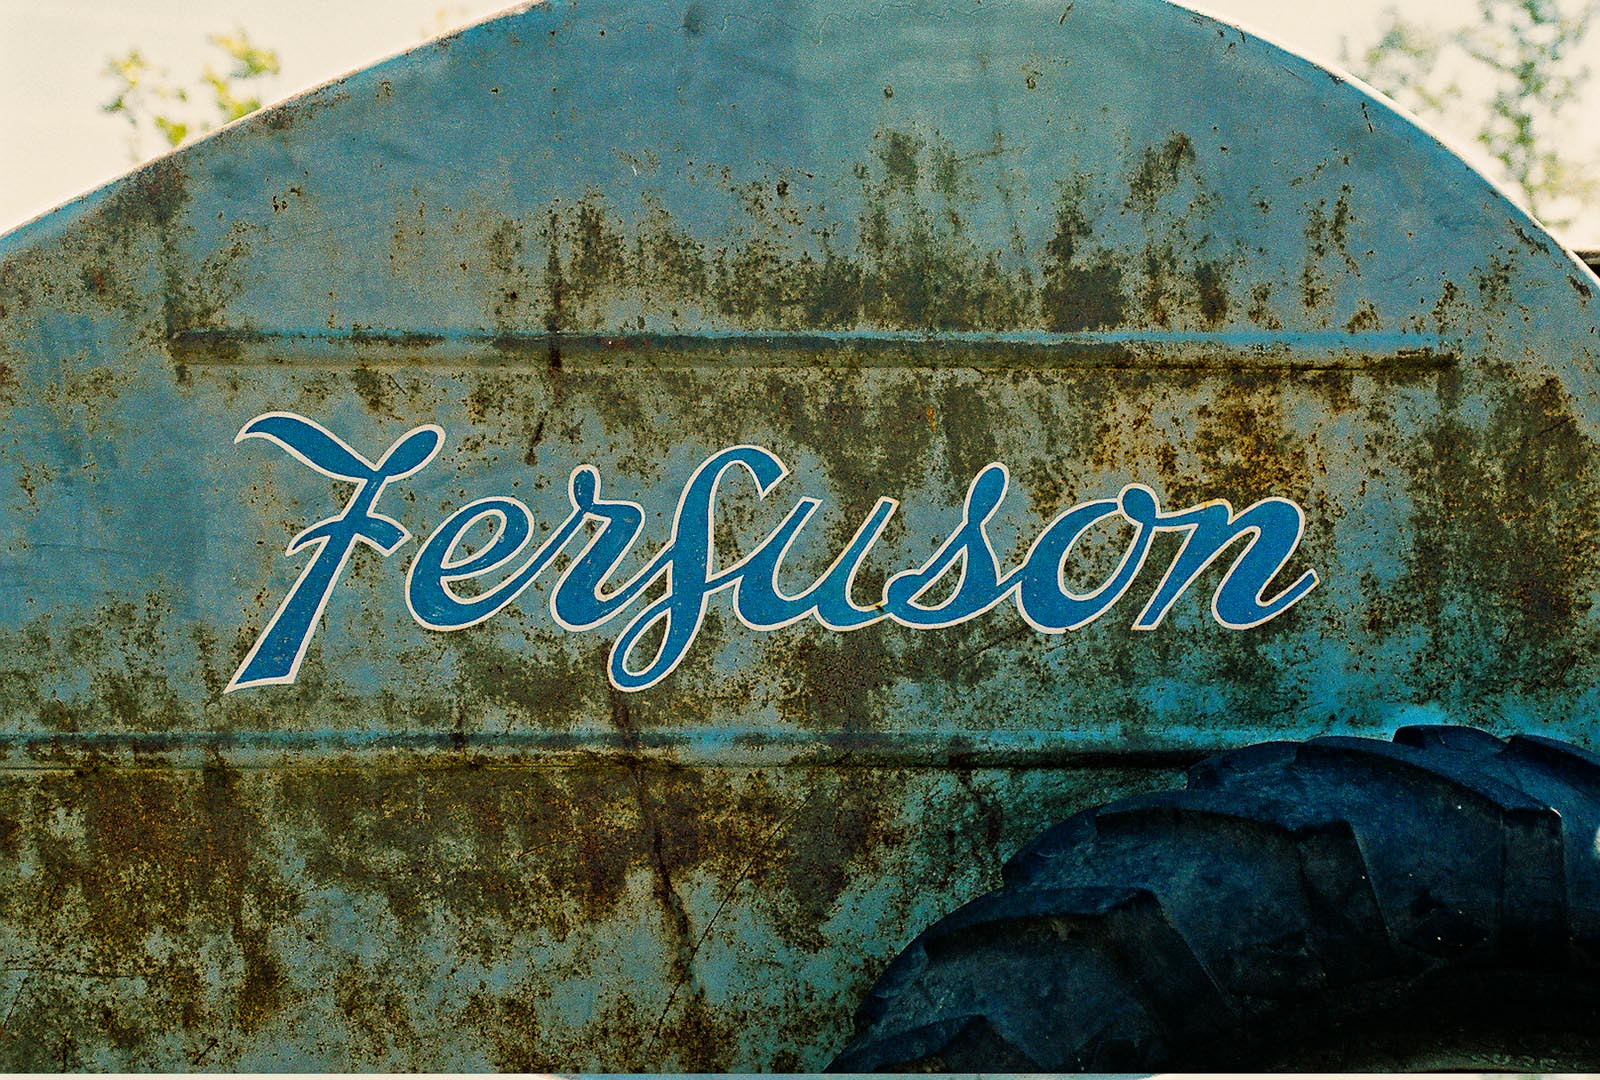 Decal on the side of the Ferguson Manure Spreader.